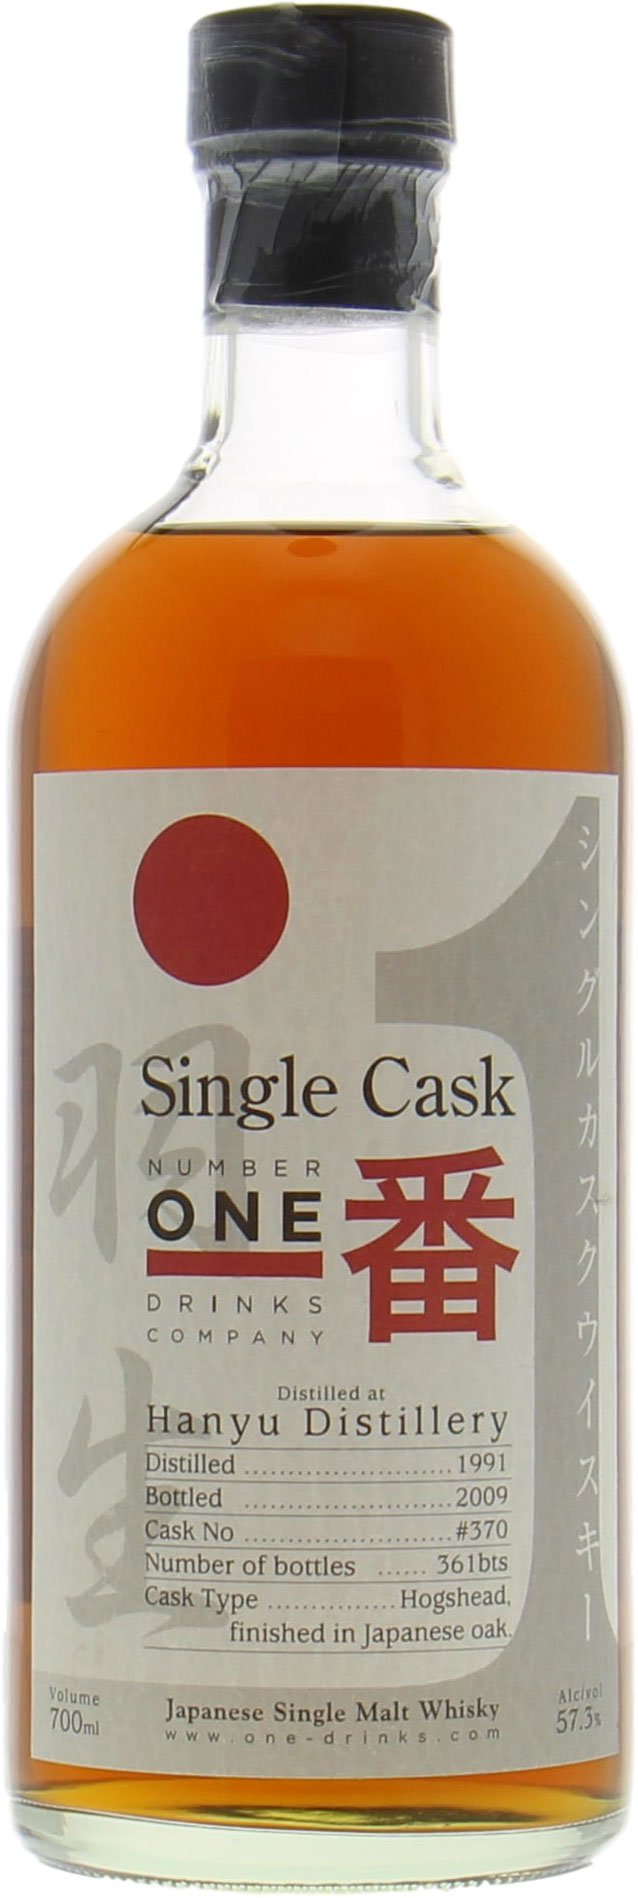 Hanyu - 1991 Cask:370 for Number One Drinks Company 57,3% 1991 Perfect